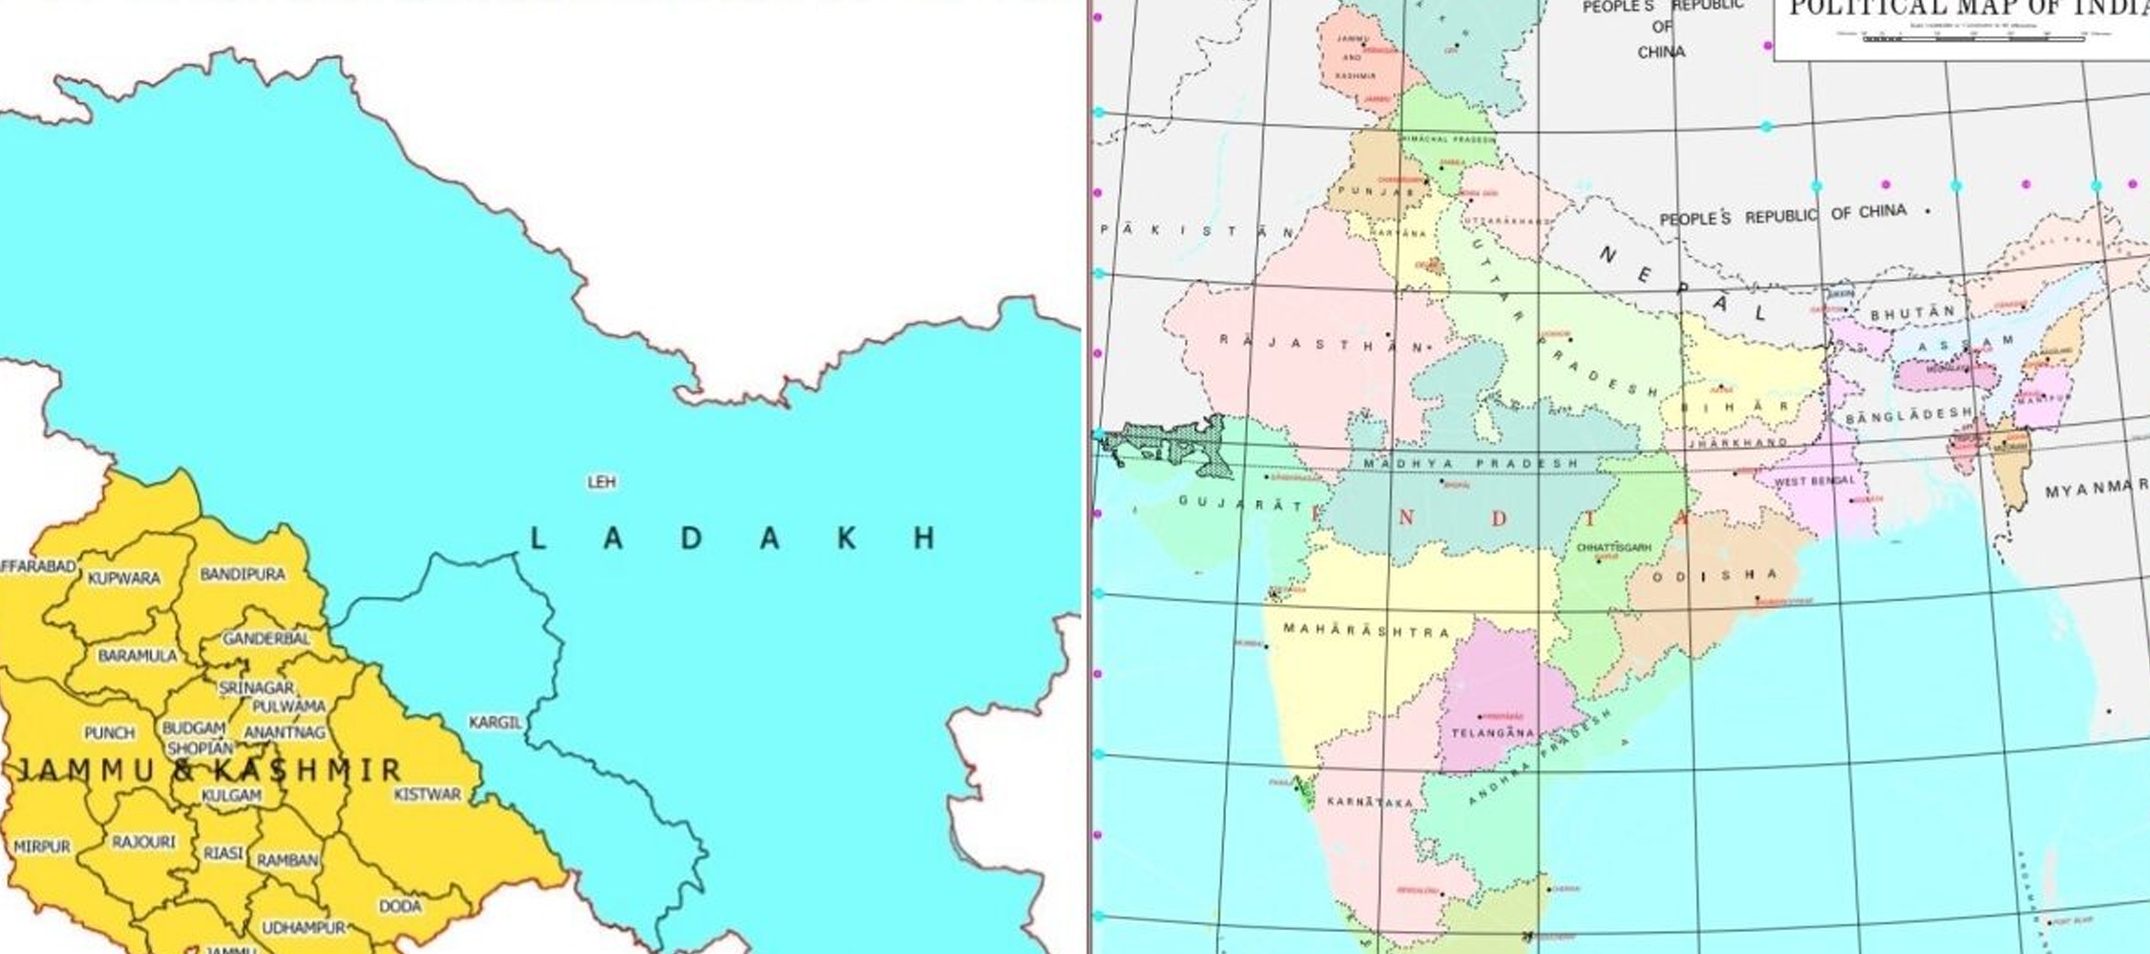 Govt releases new map of India showing UTs of Jammu and Kashmir, Ladakh